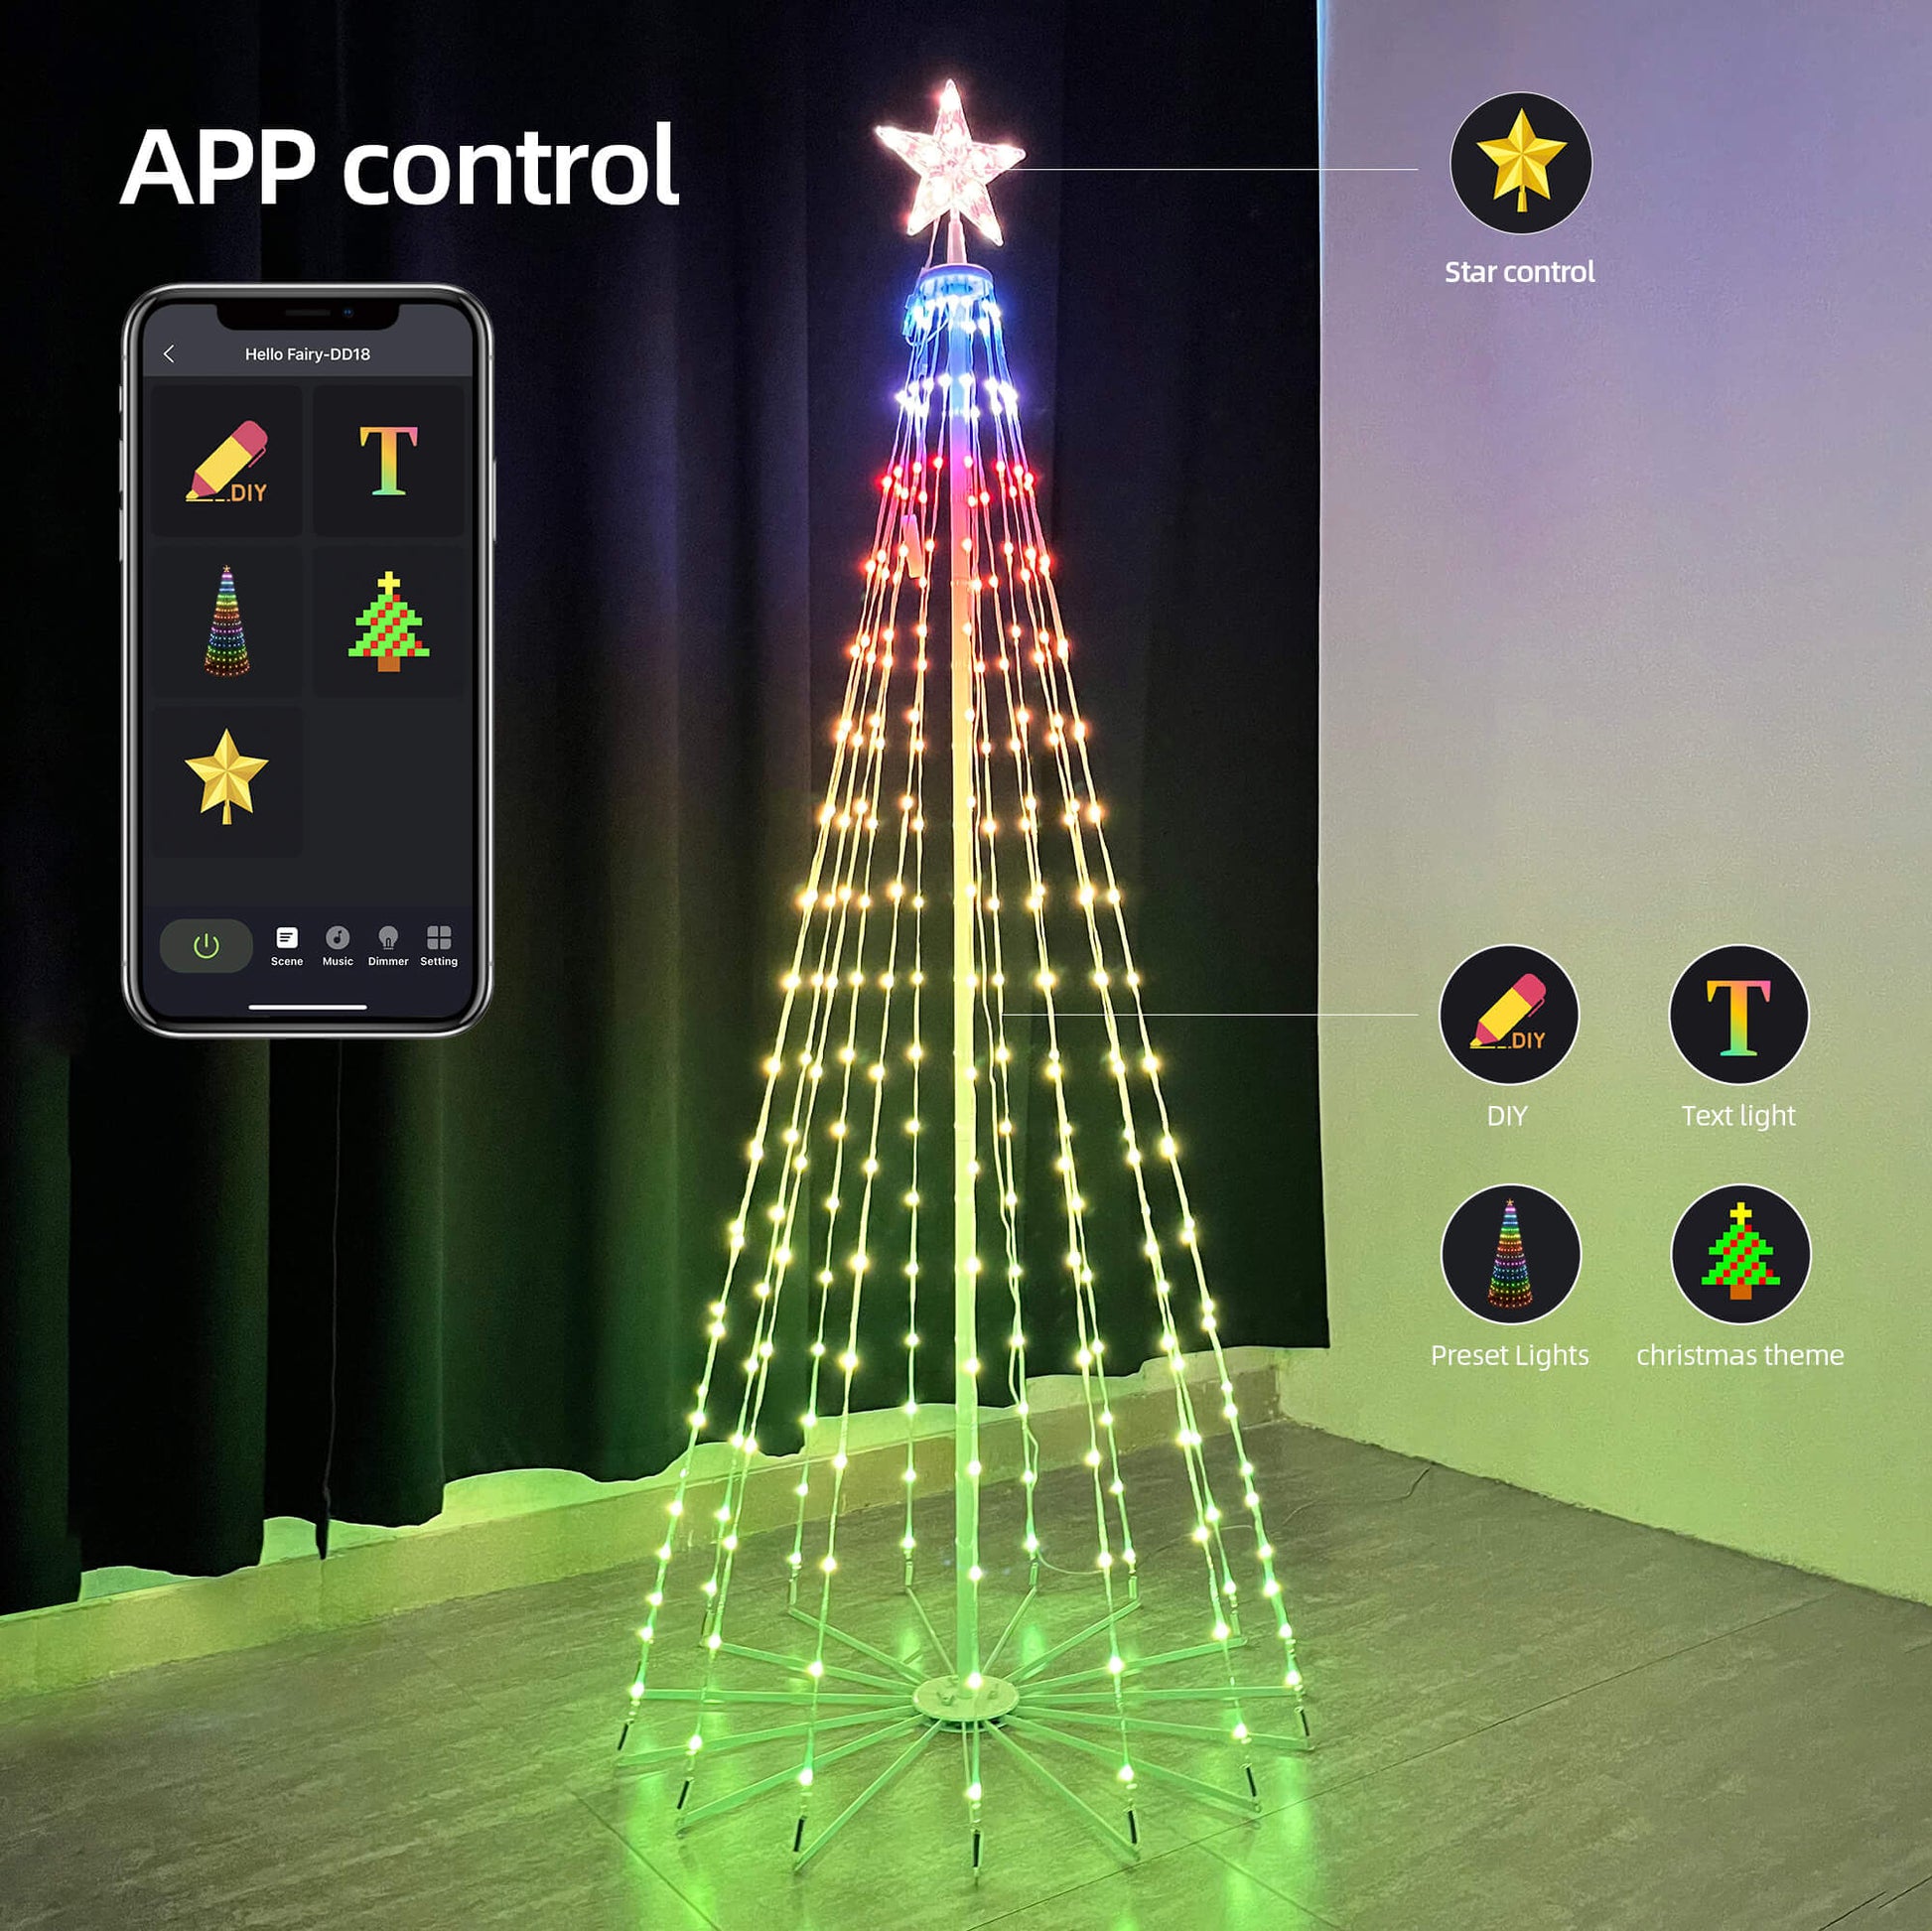 Avatar Controls 245-Count 20.5-ft Multi-function LED Plug-In Christmas String Lights Timer | ABSL33